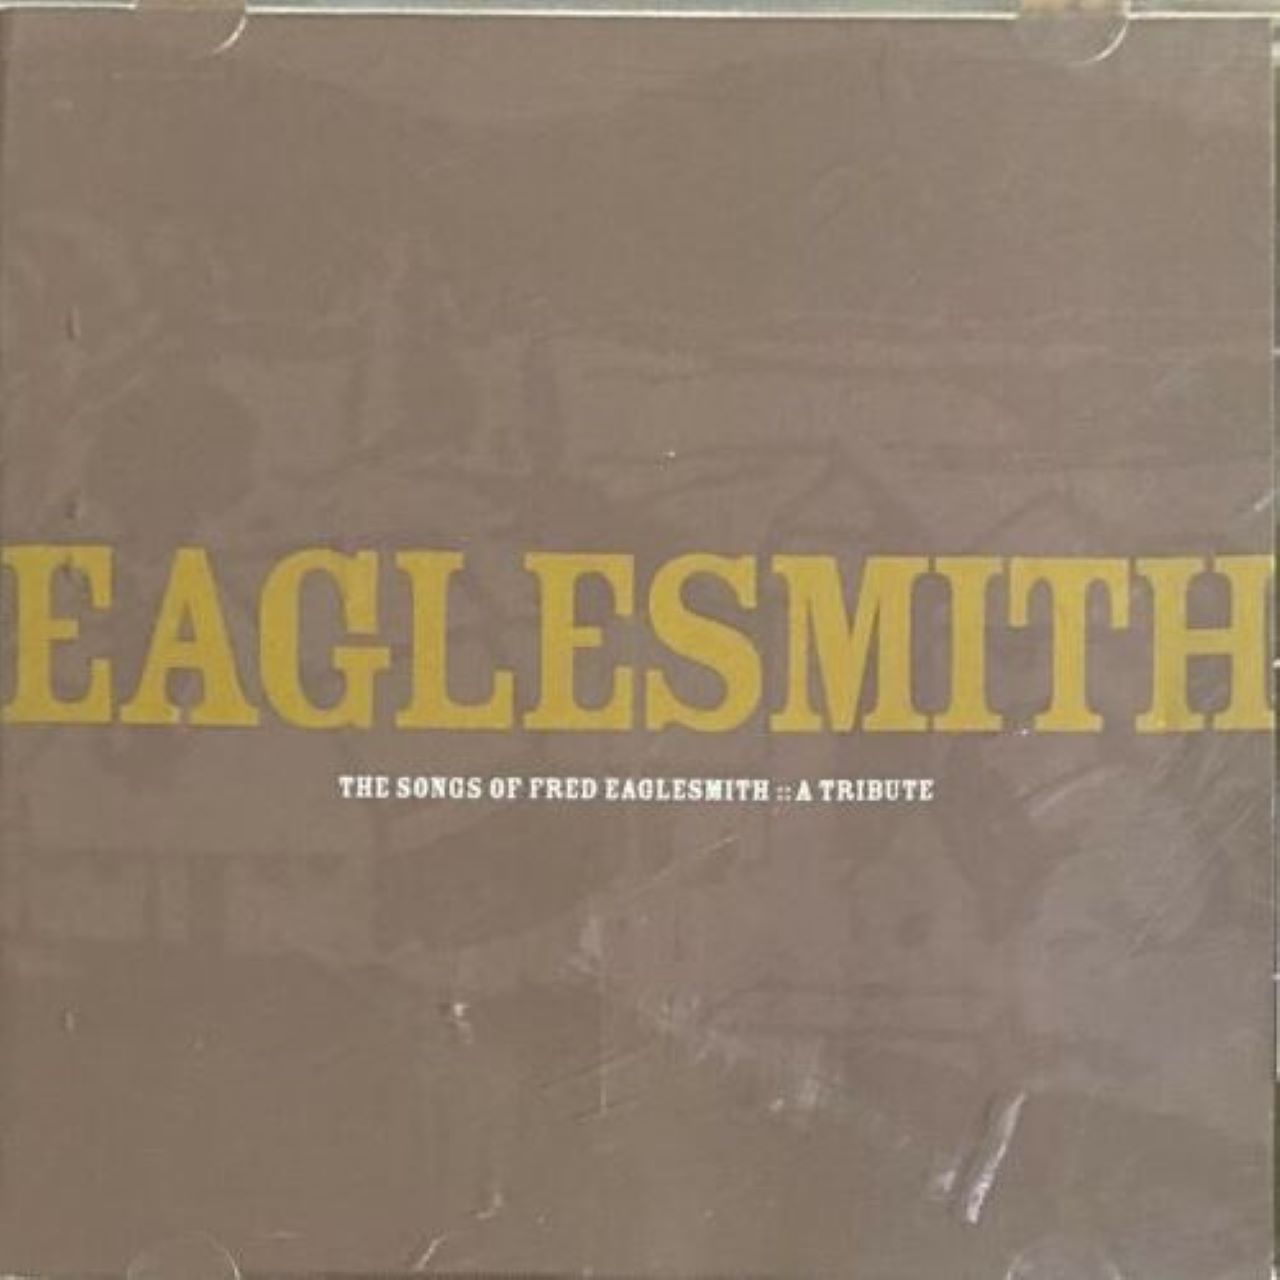 A.A.V.V. – Eaglesmith – The Songs Of Fred Eaglesmith. A Tribute cover album